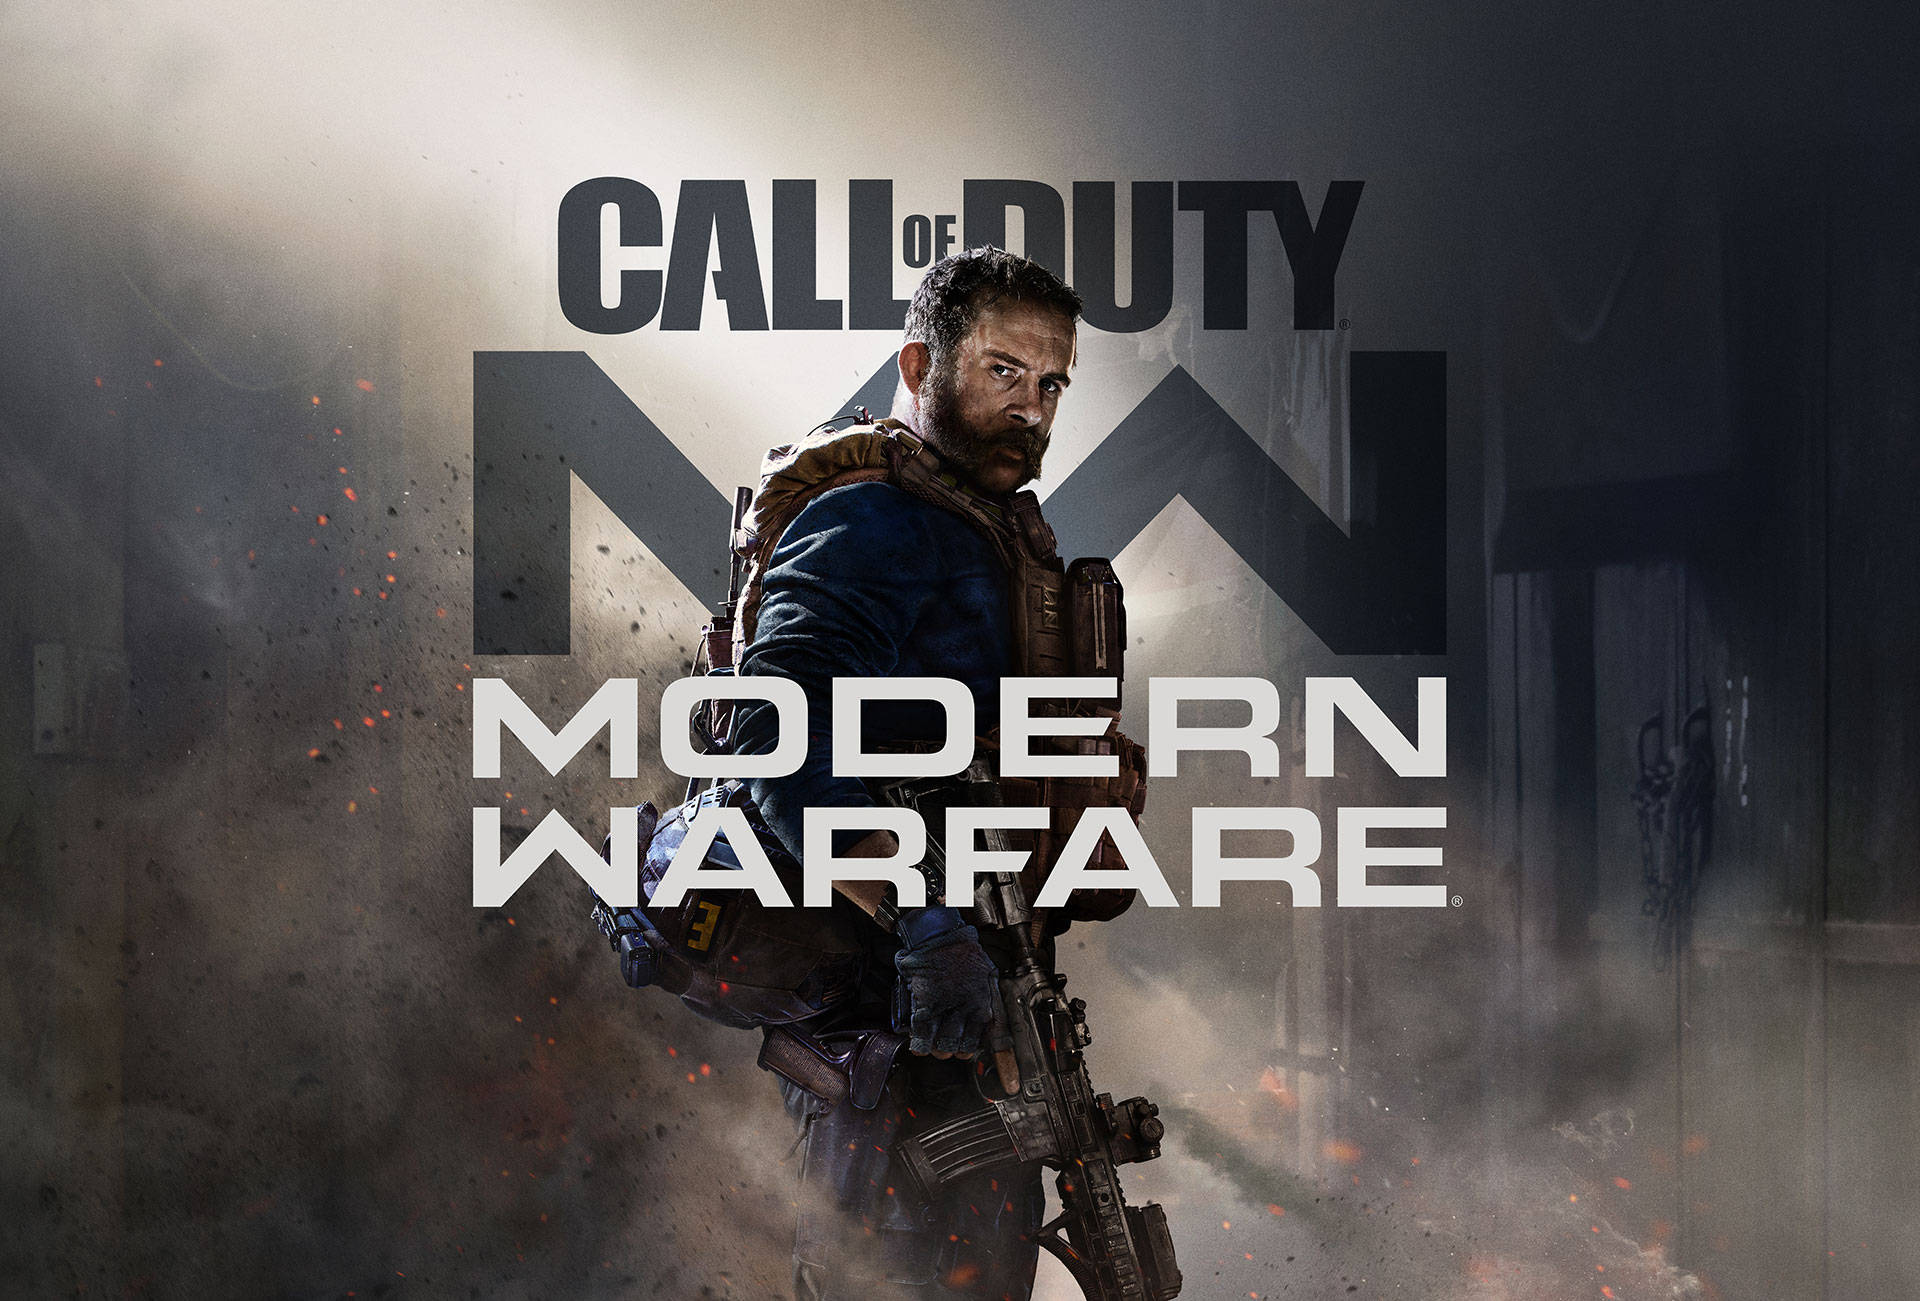 Play Call of Duty Modern Warfare and experience exciting first-person shooter action Wallpaper